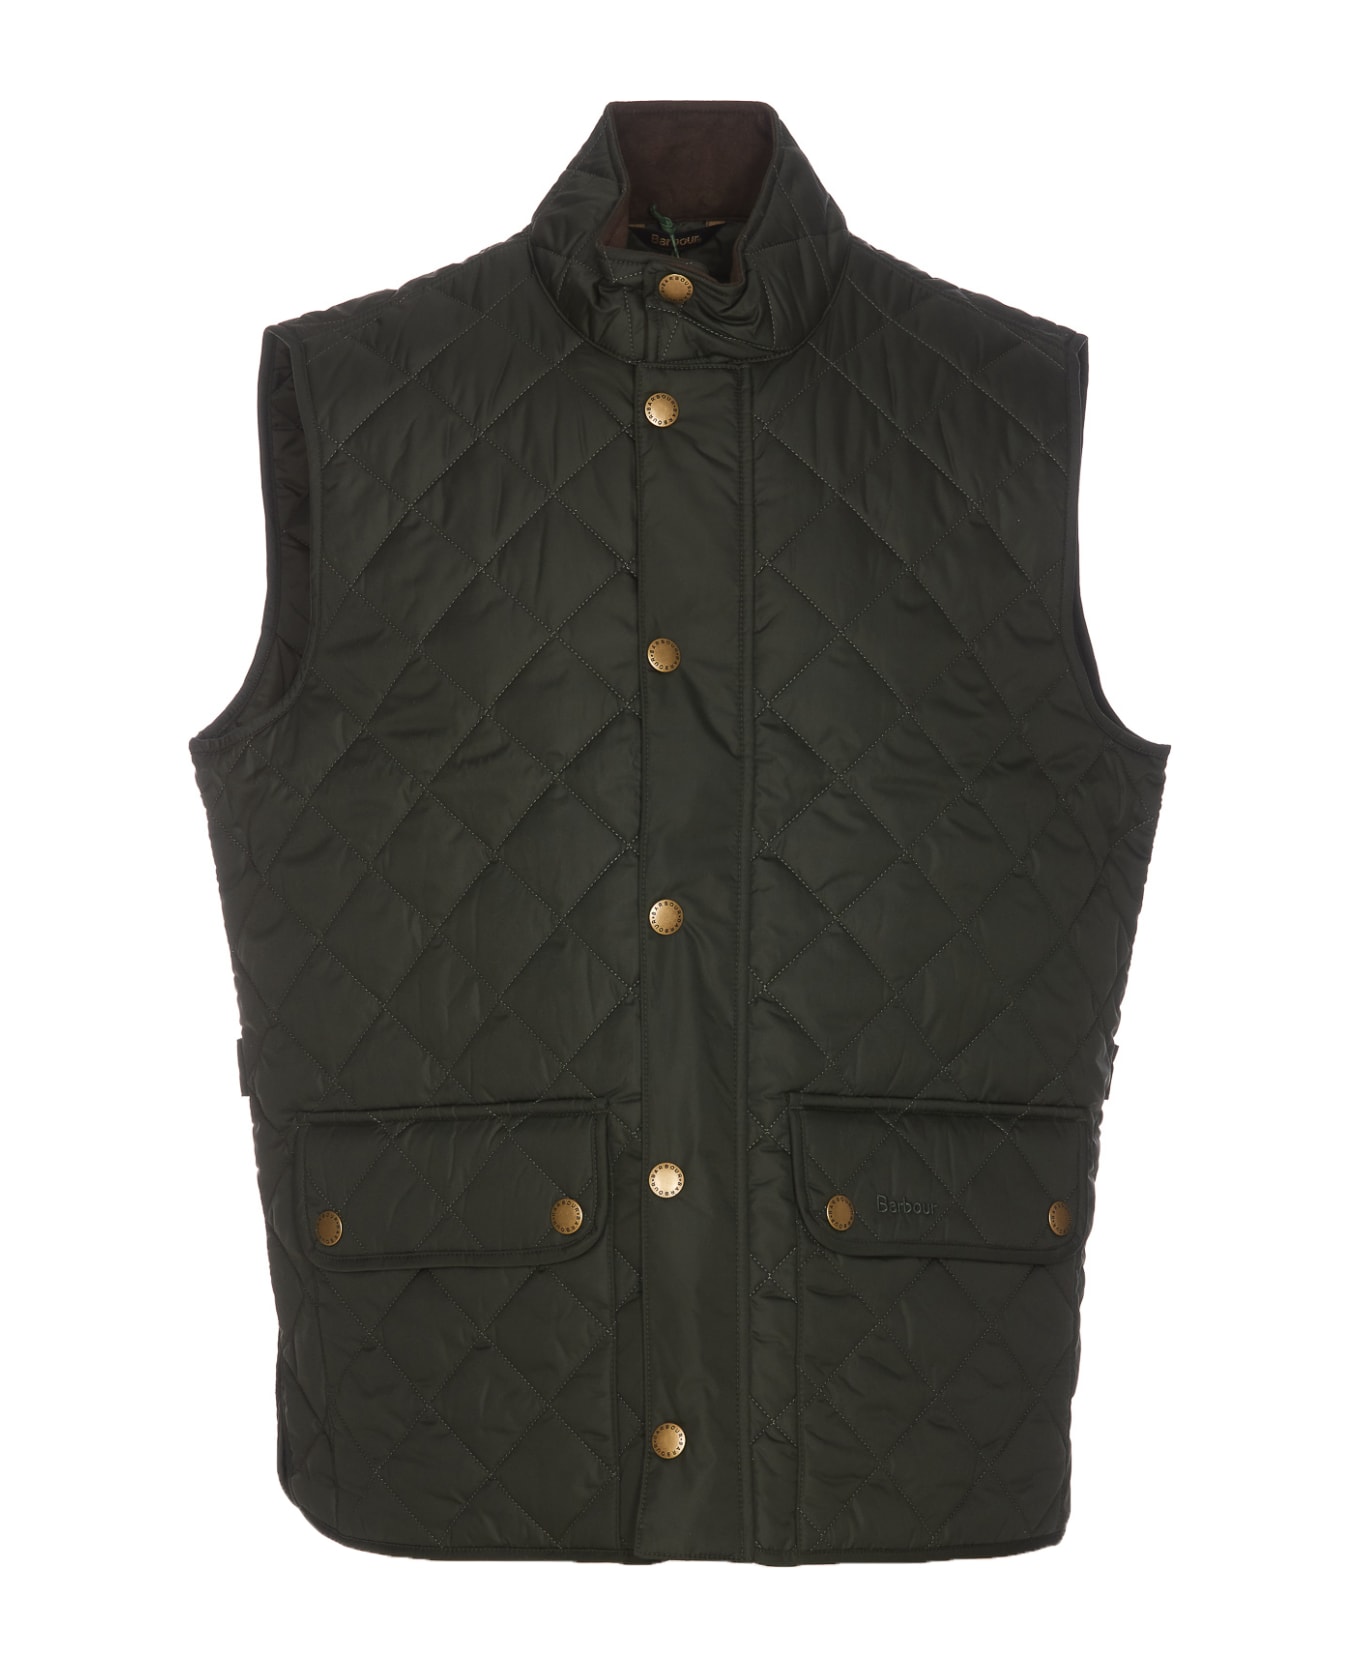 Barbour New Lowerdale Vest - Green